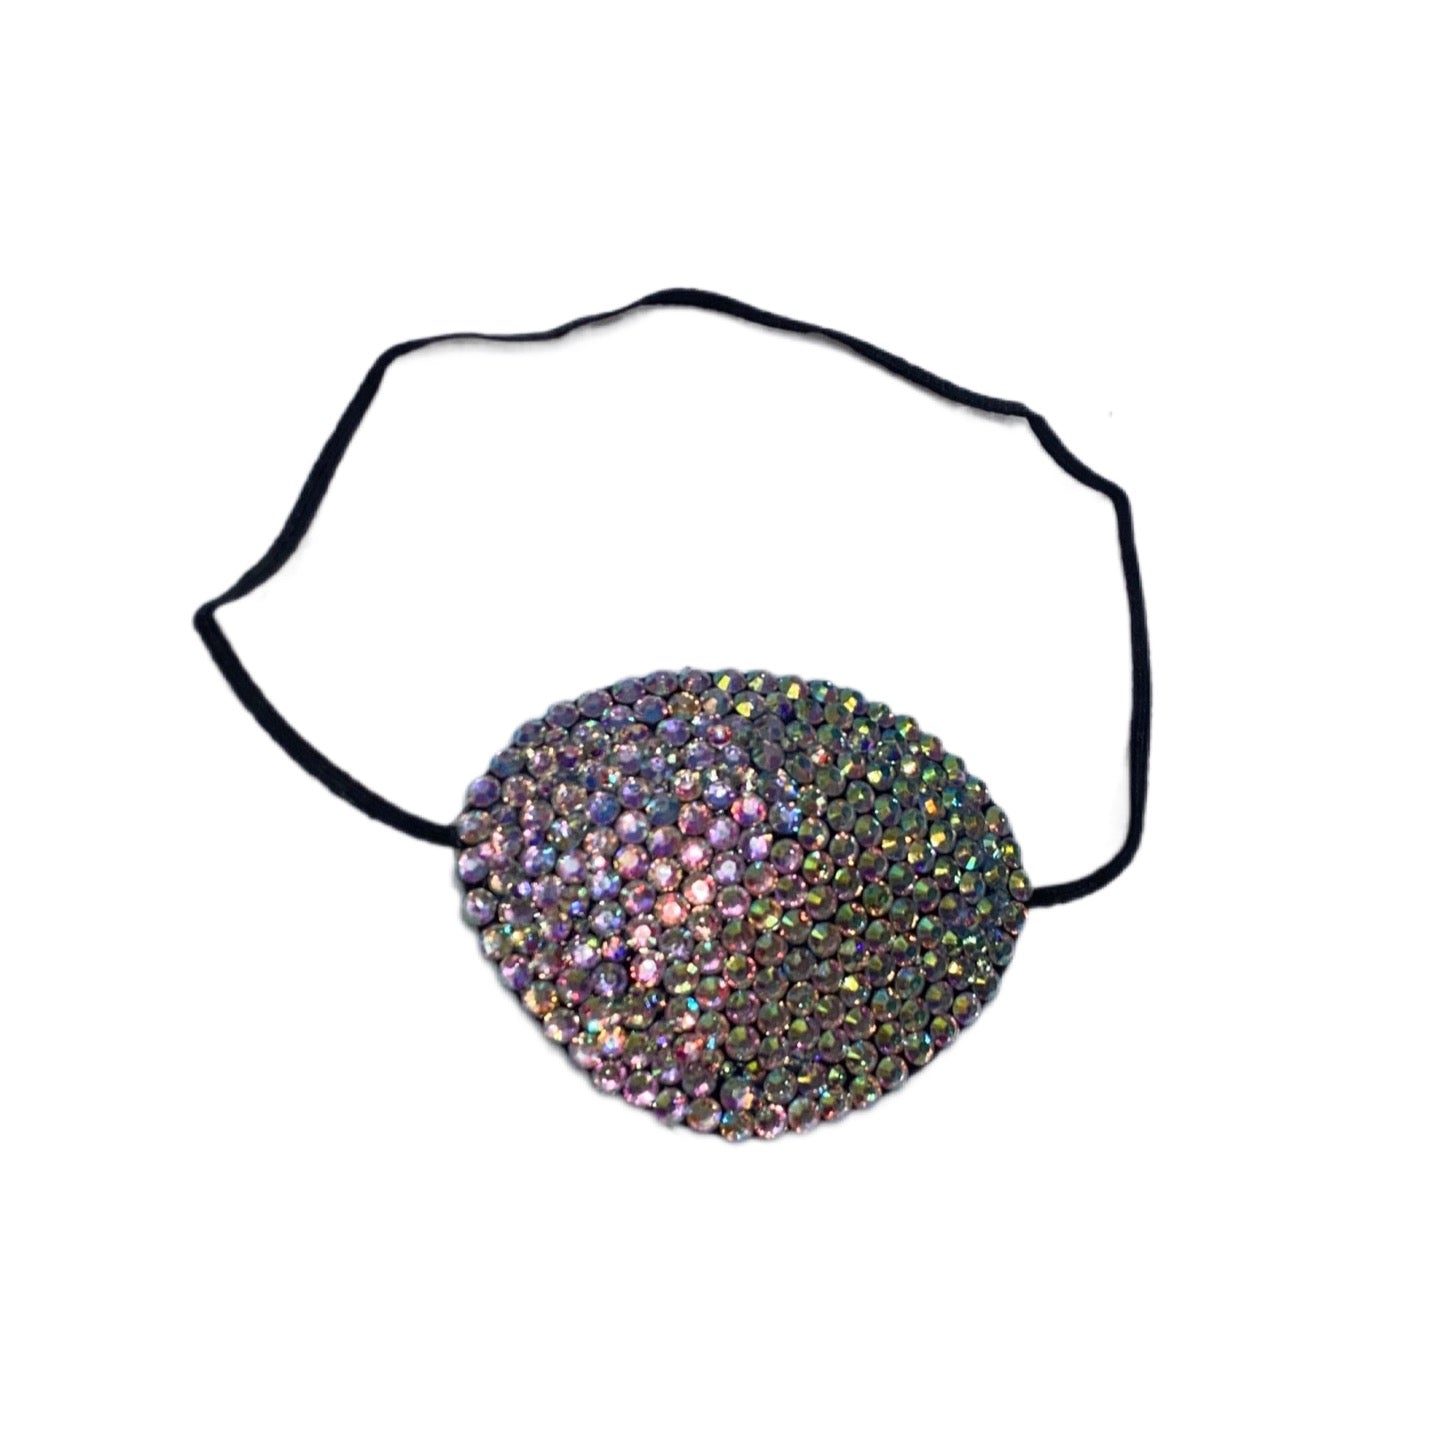 Black Eye Patch Bedazzled In Crystal AB